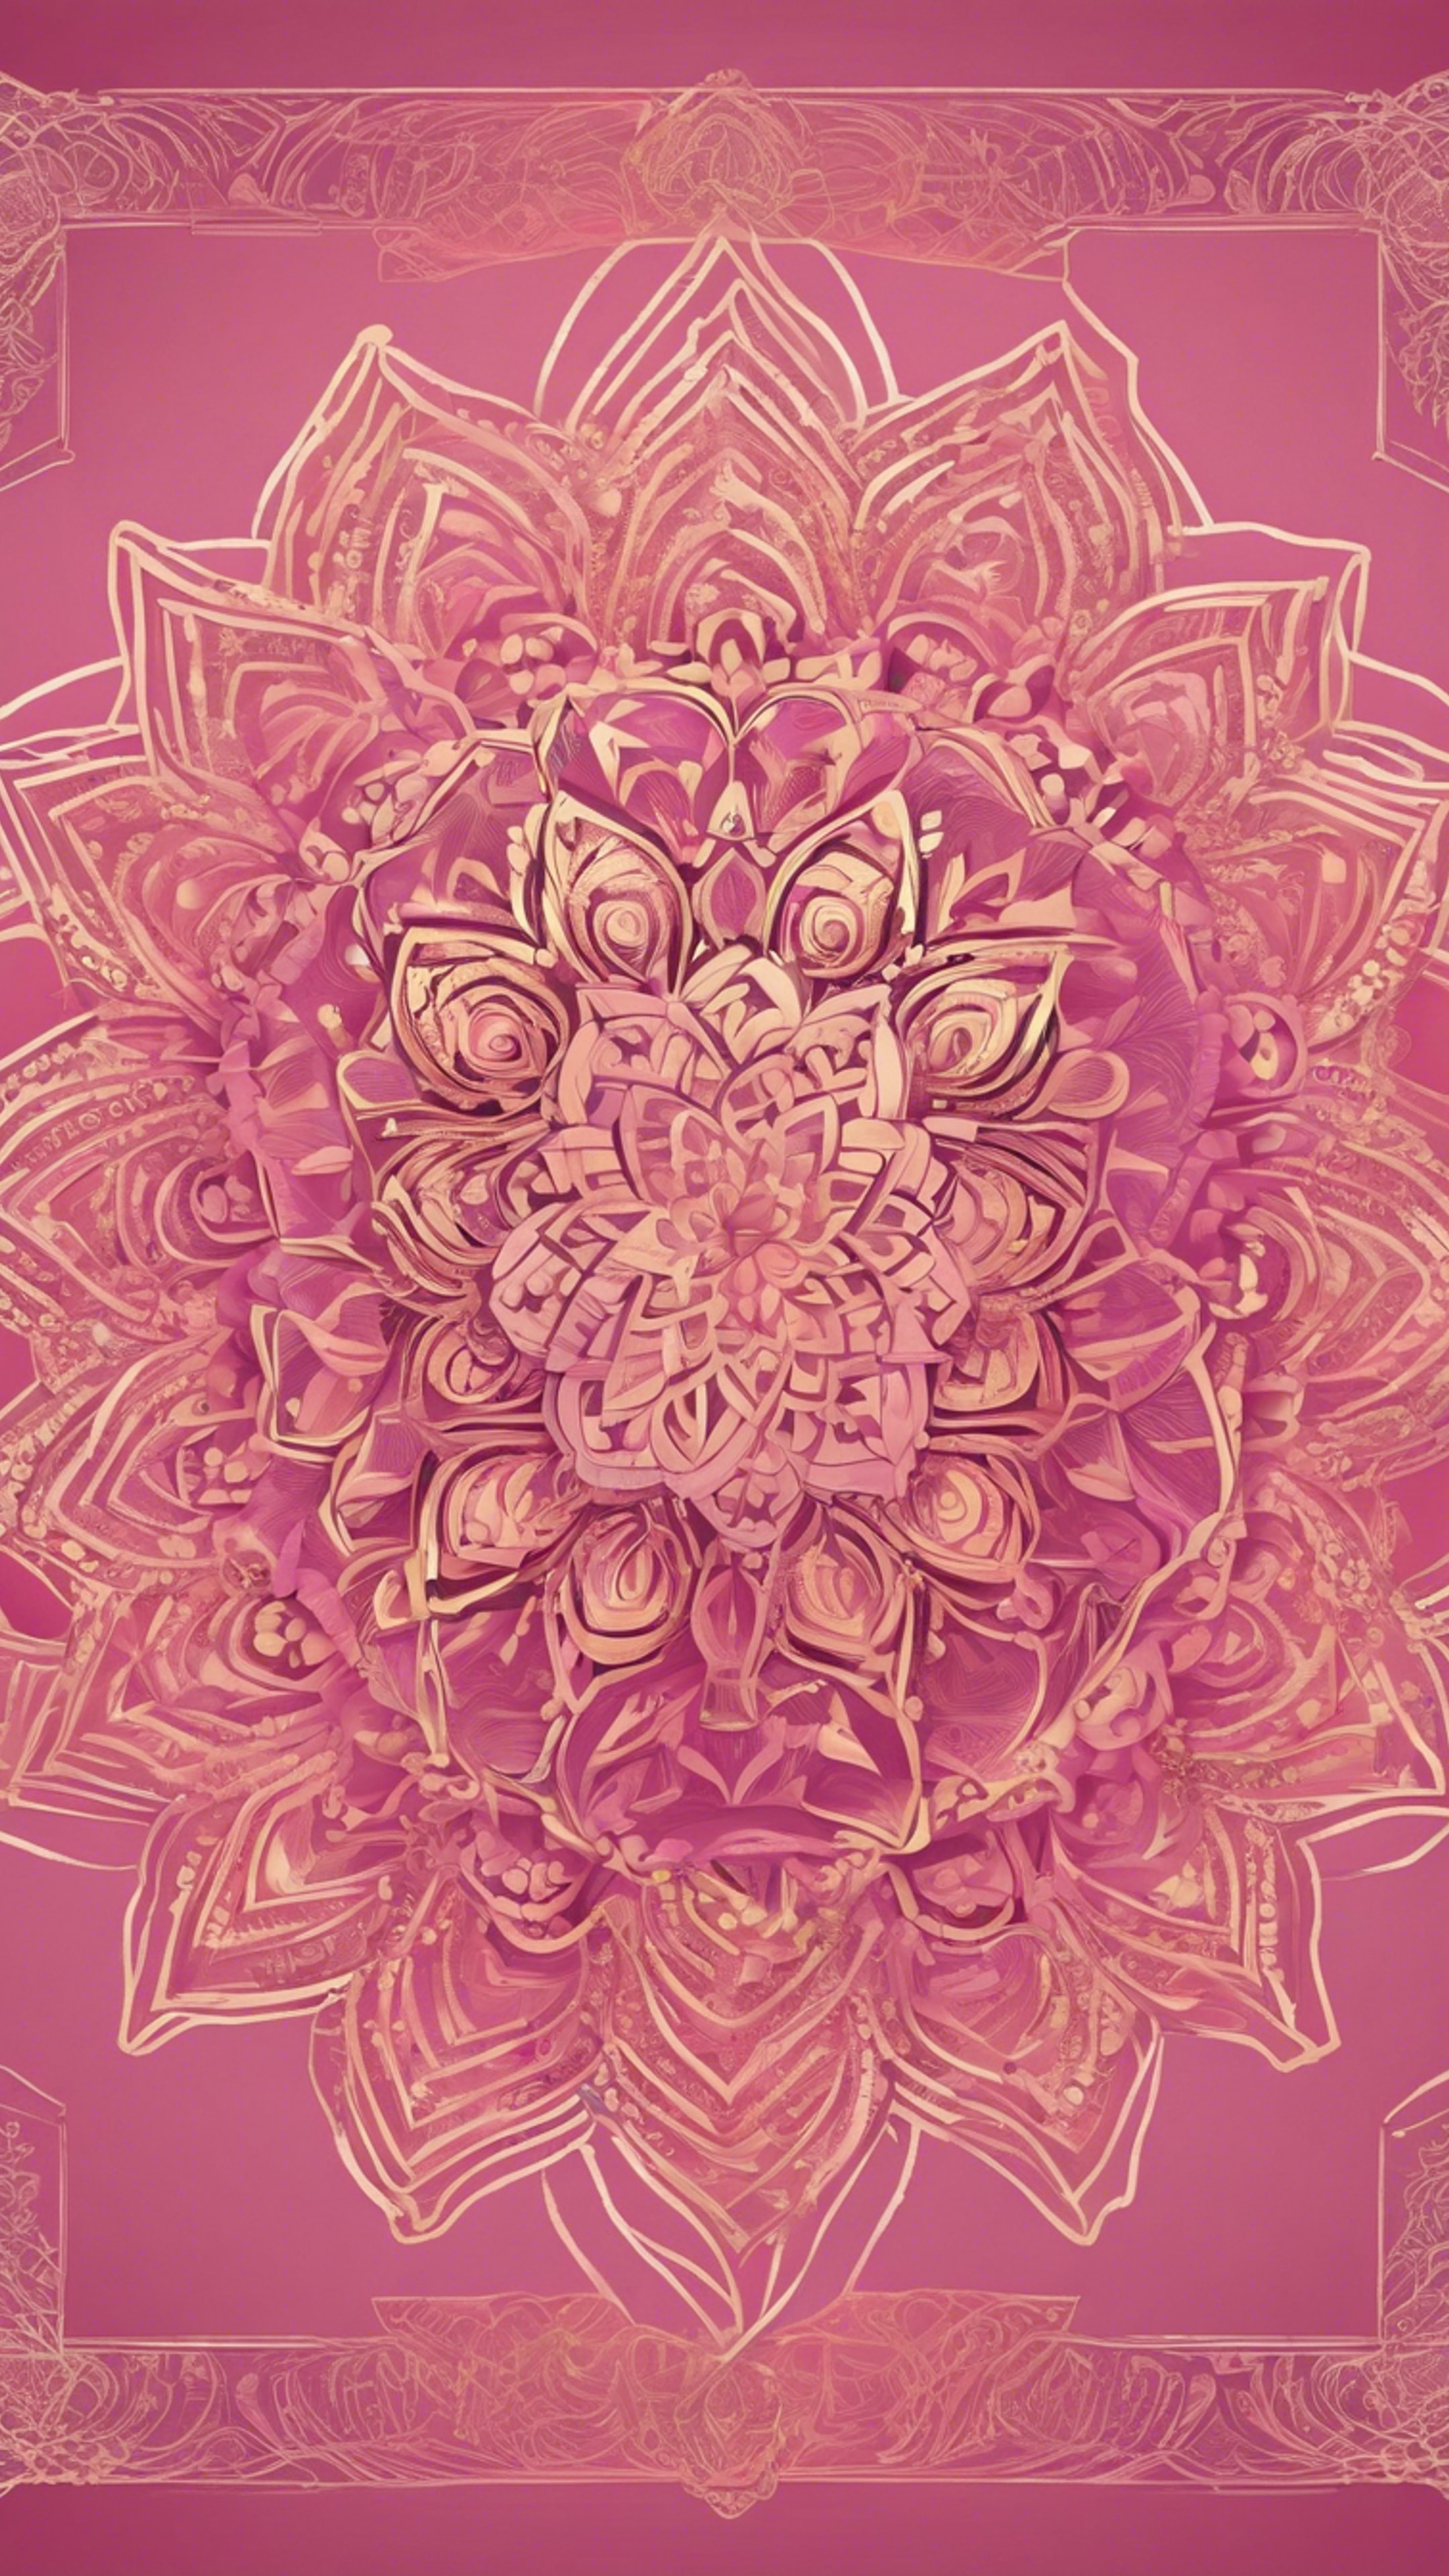 A pink and gold mandala design flourishing with intricate line art and vibrant colors. Tapetai[7f3fcd6ed997428c89d3]